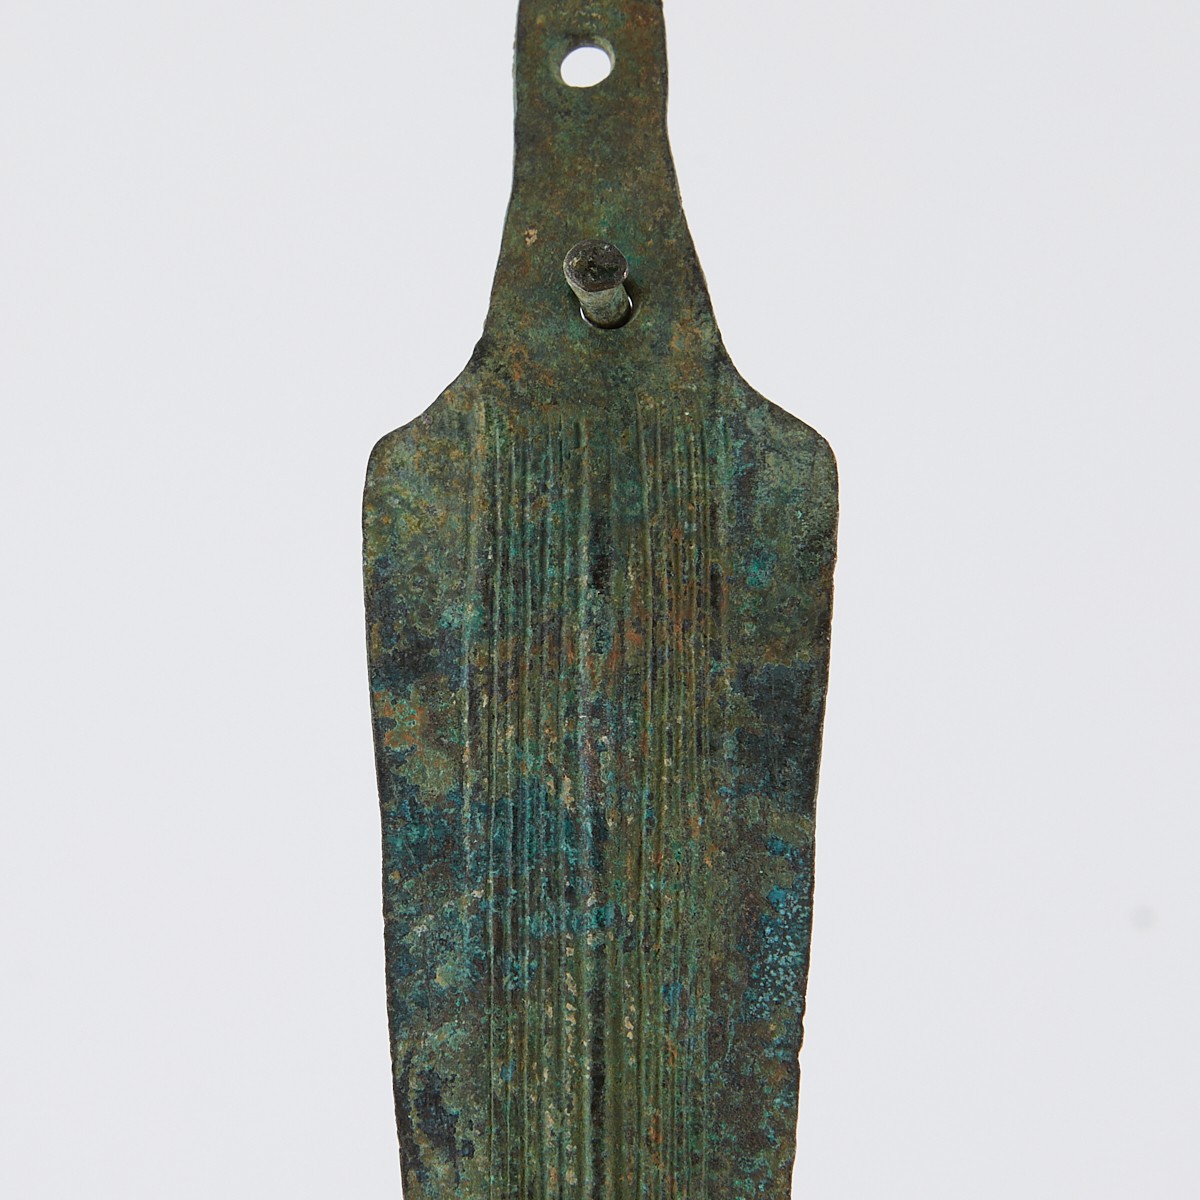 5 Chinese Archaic Bronze Weapons - Image 10 of 10